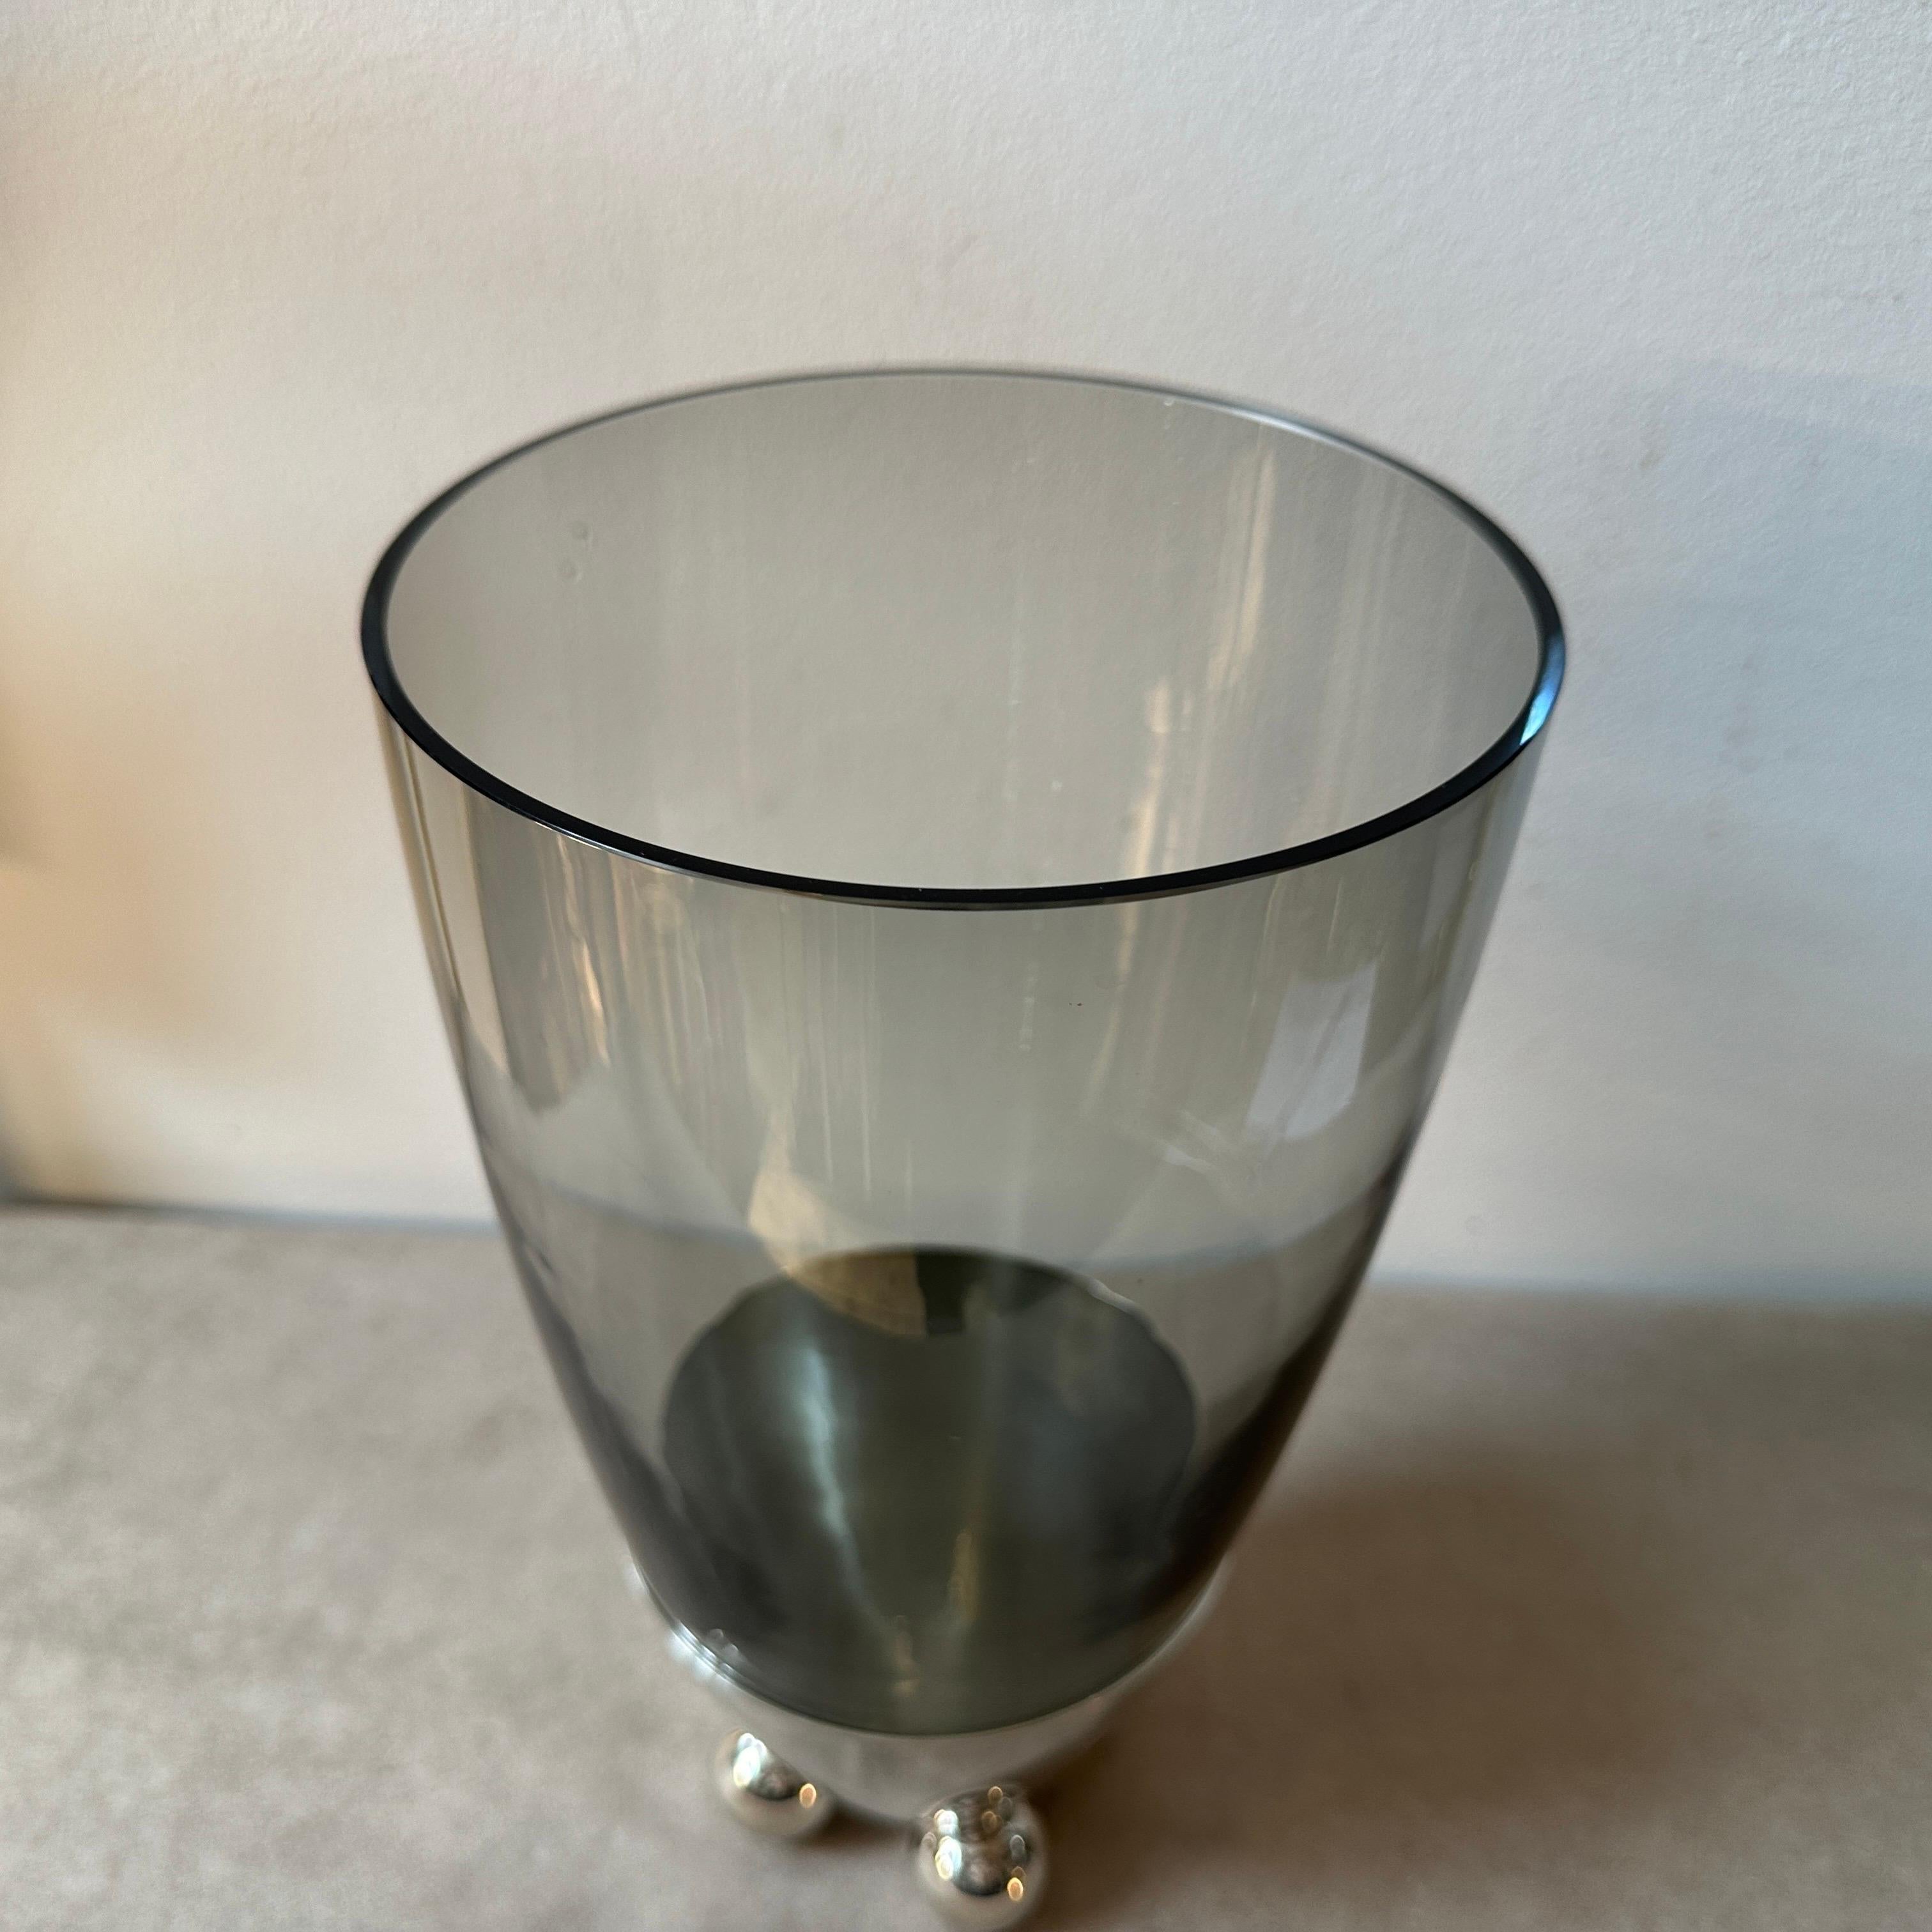 1990s Space Age Silver Plated Atomes Vase by Richard Hutten for Christofle For Sale 3